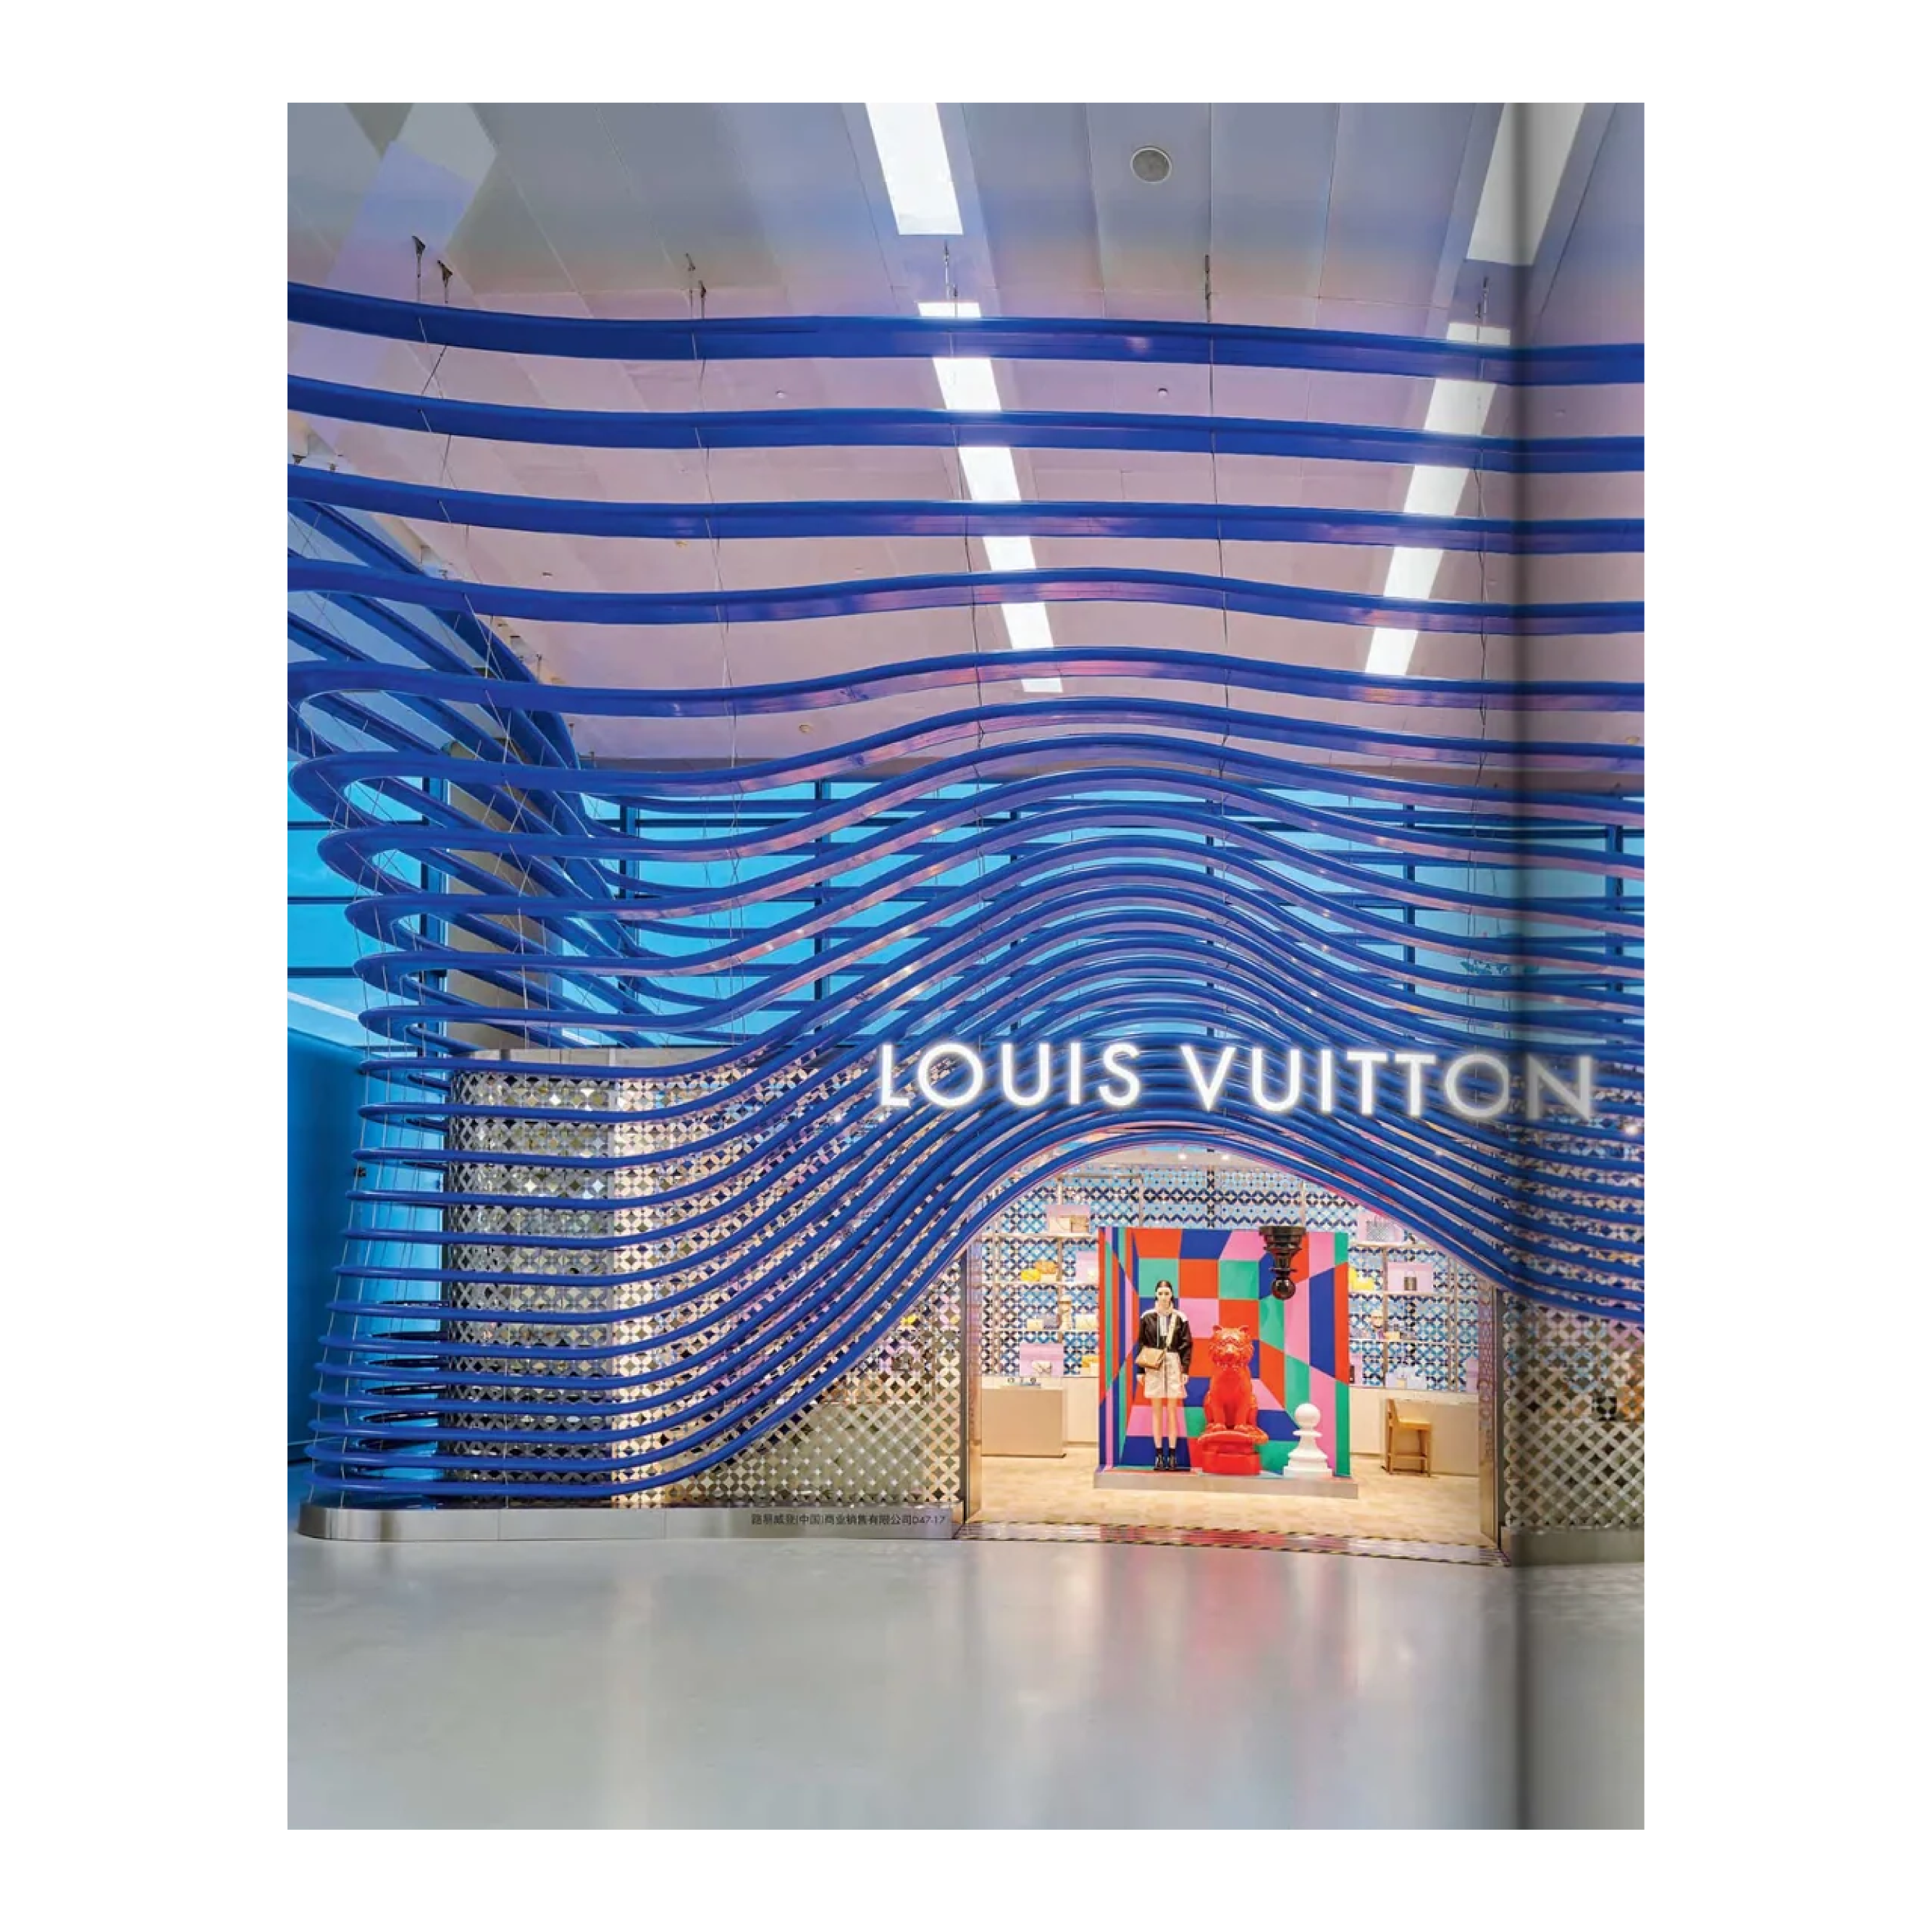 Louis Vuitton Skin: Architecture of Luxury. Singapore Cover [Book]